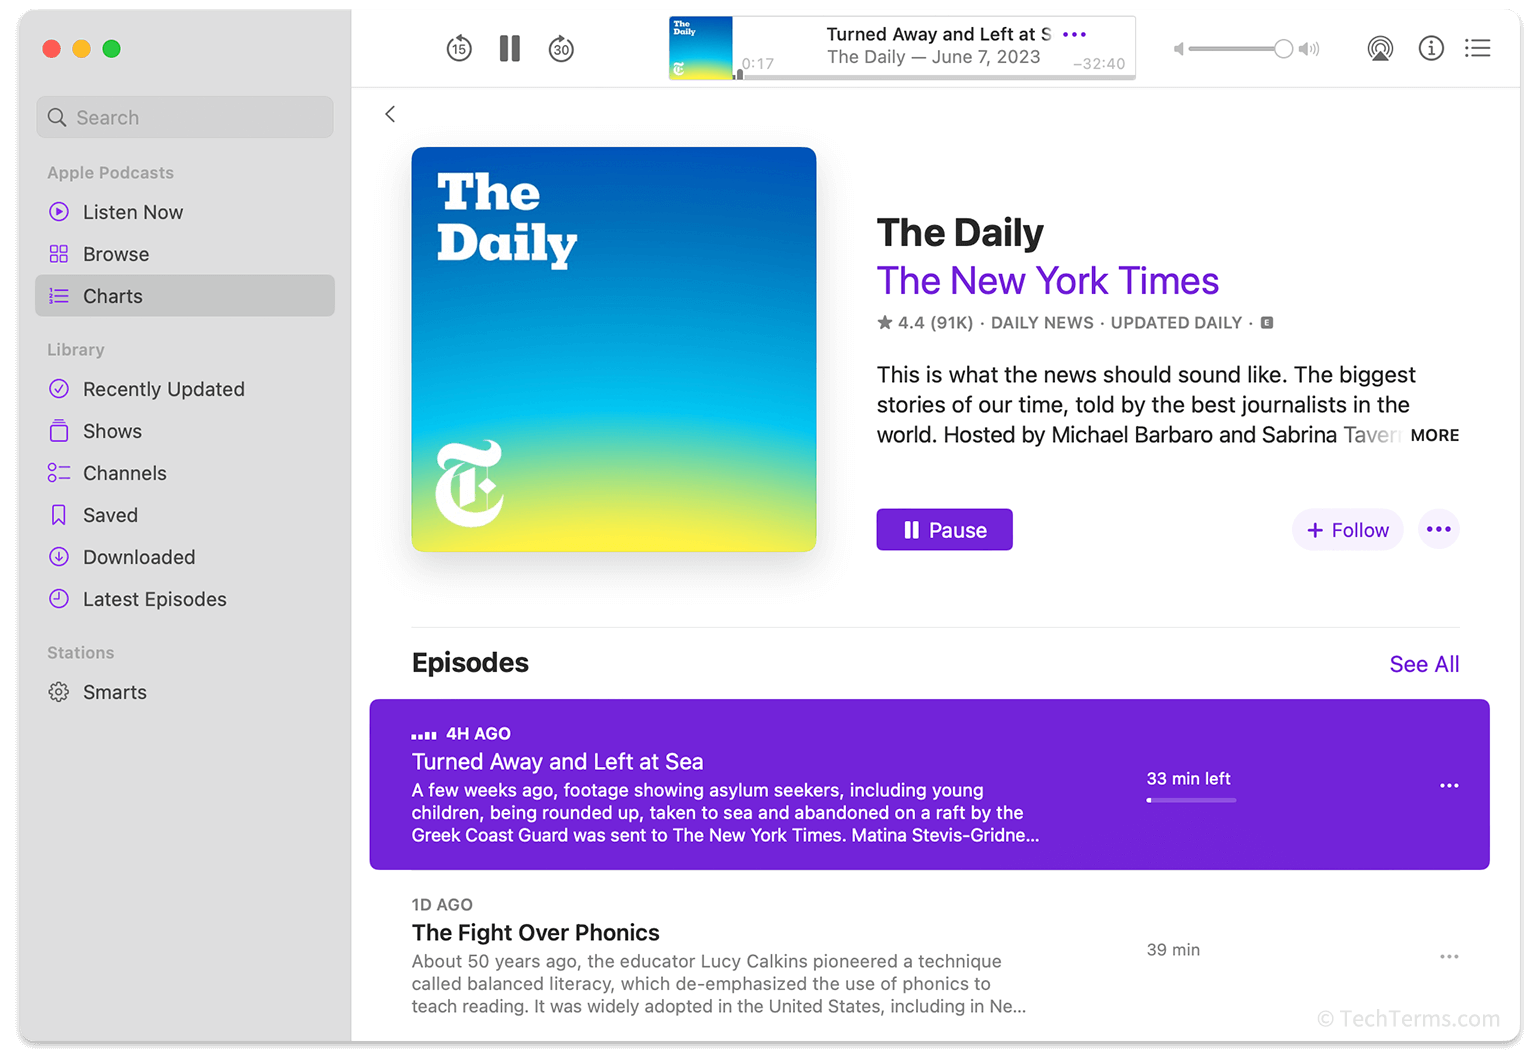 The New York Times' <I>The Daily</I> podcast in the Apple Podcasts app